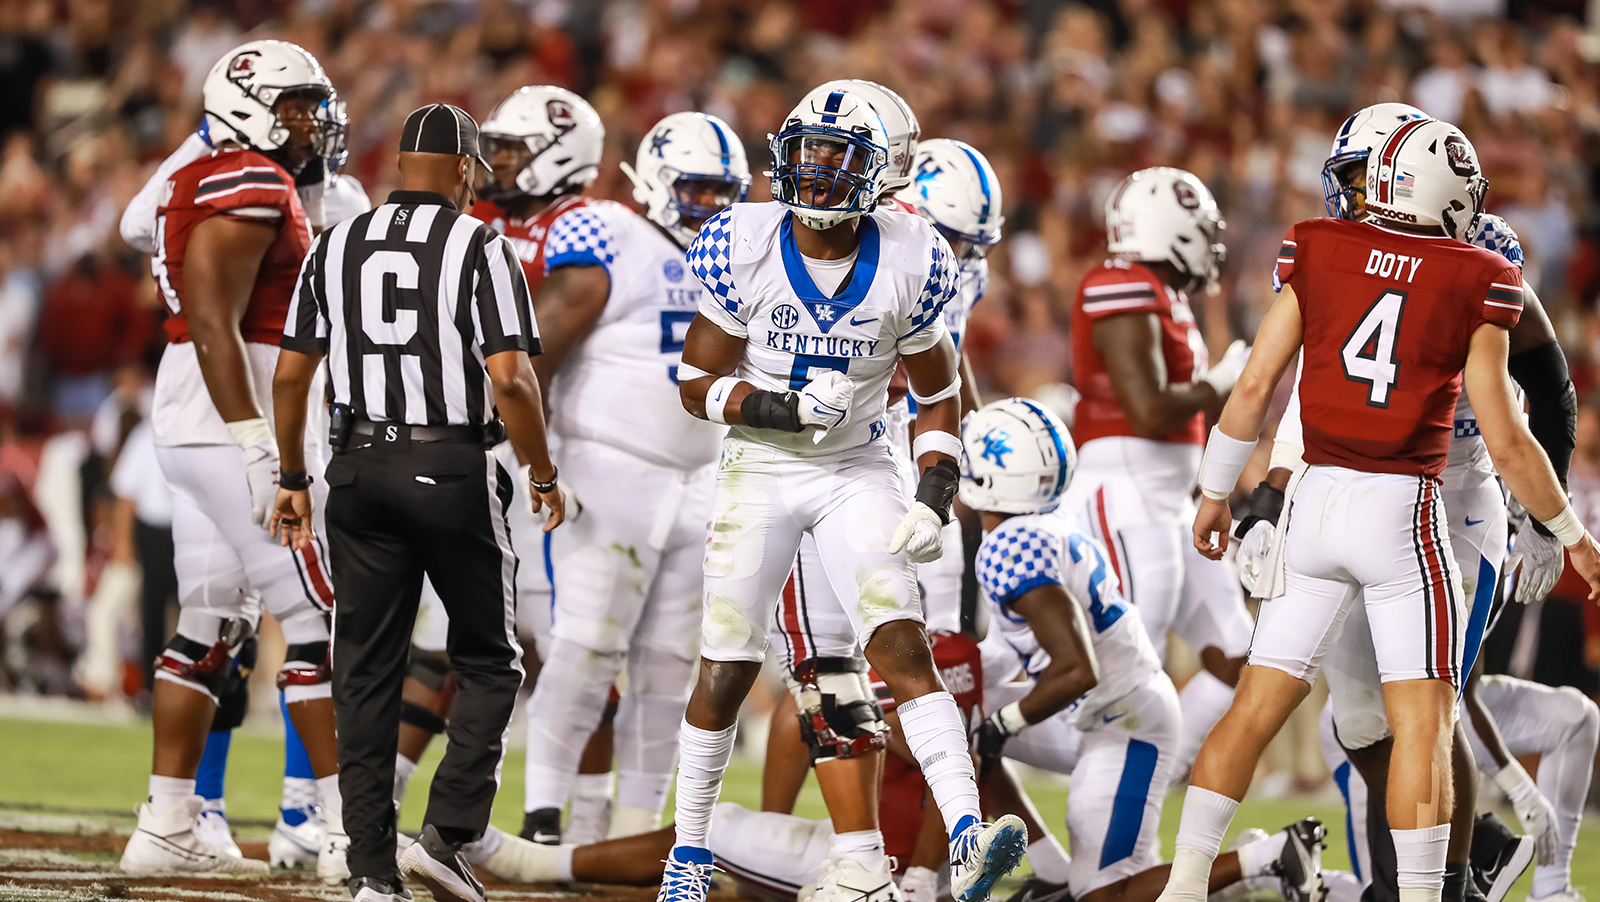 Kentucky Defense Rises to Occasion Time and Again on Saturday